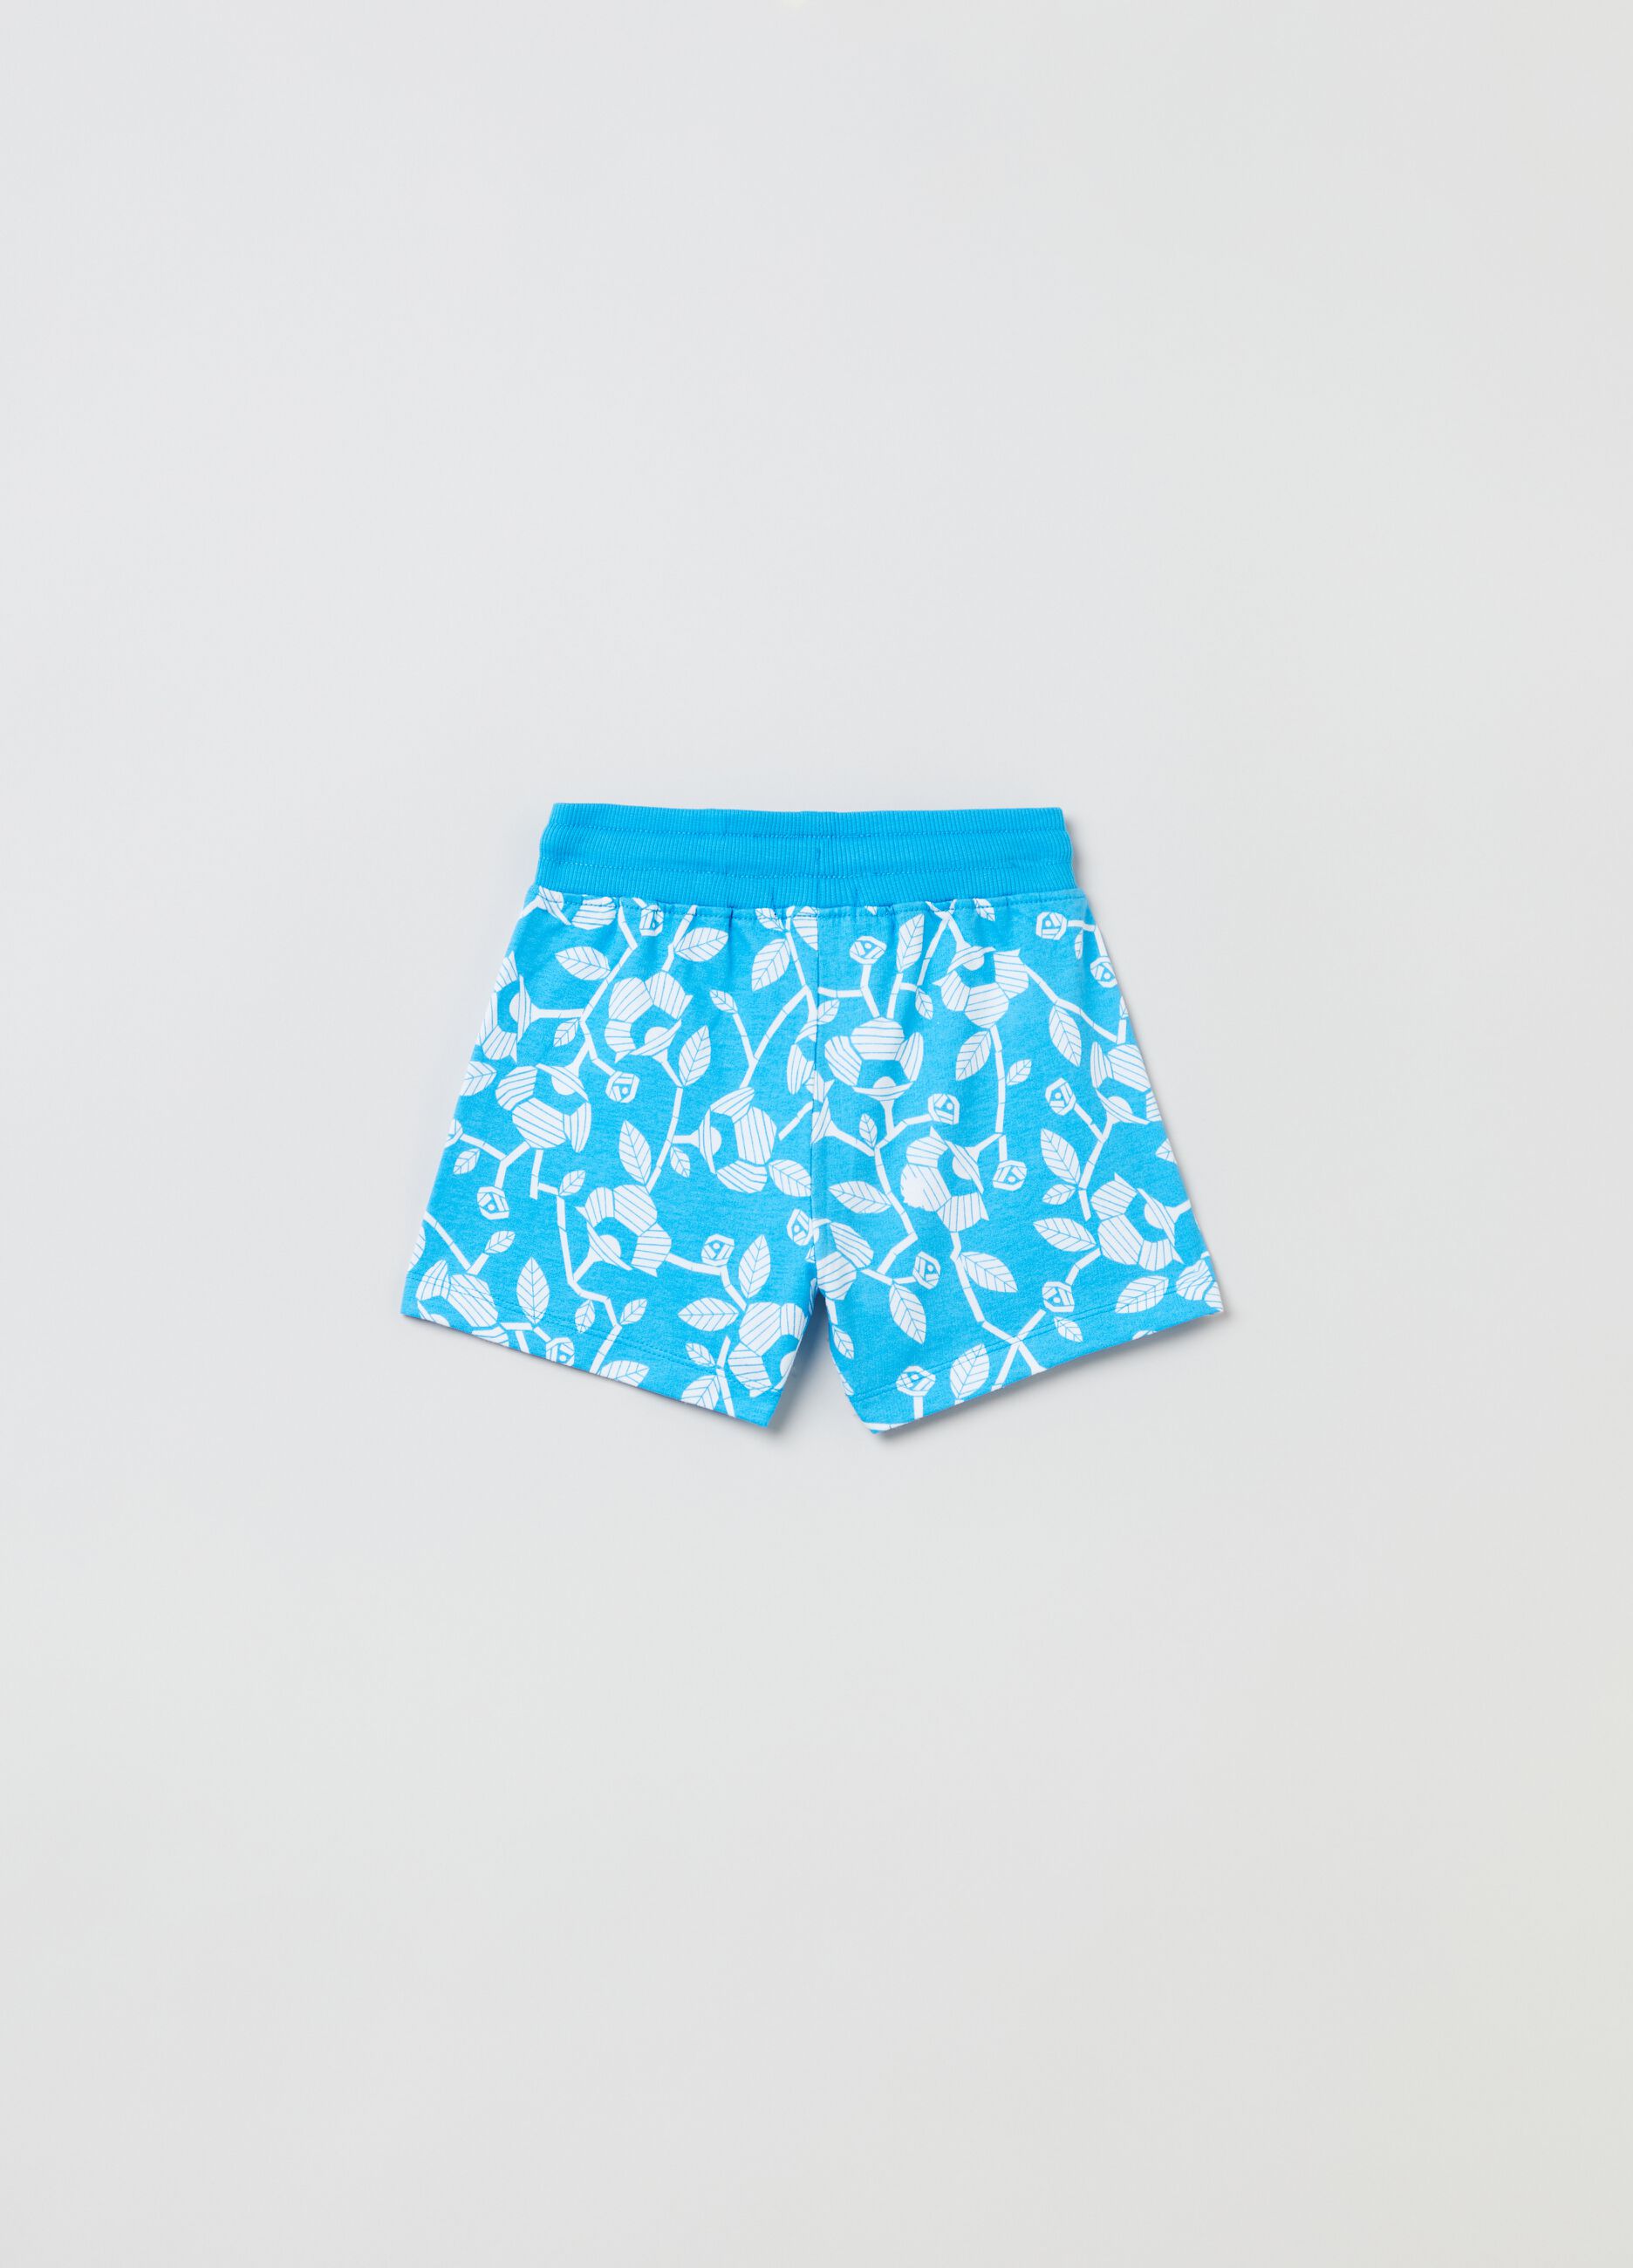 Shorts con stampa floreale e coulisse